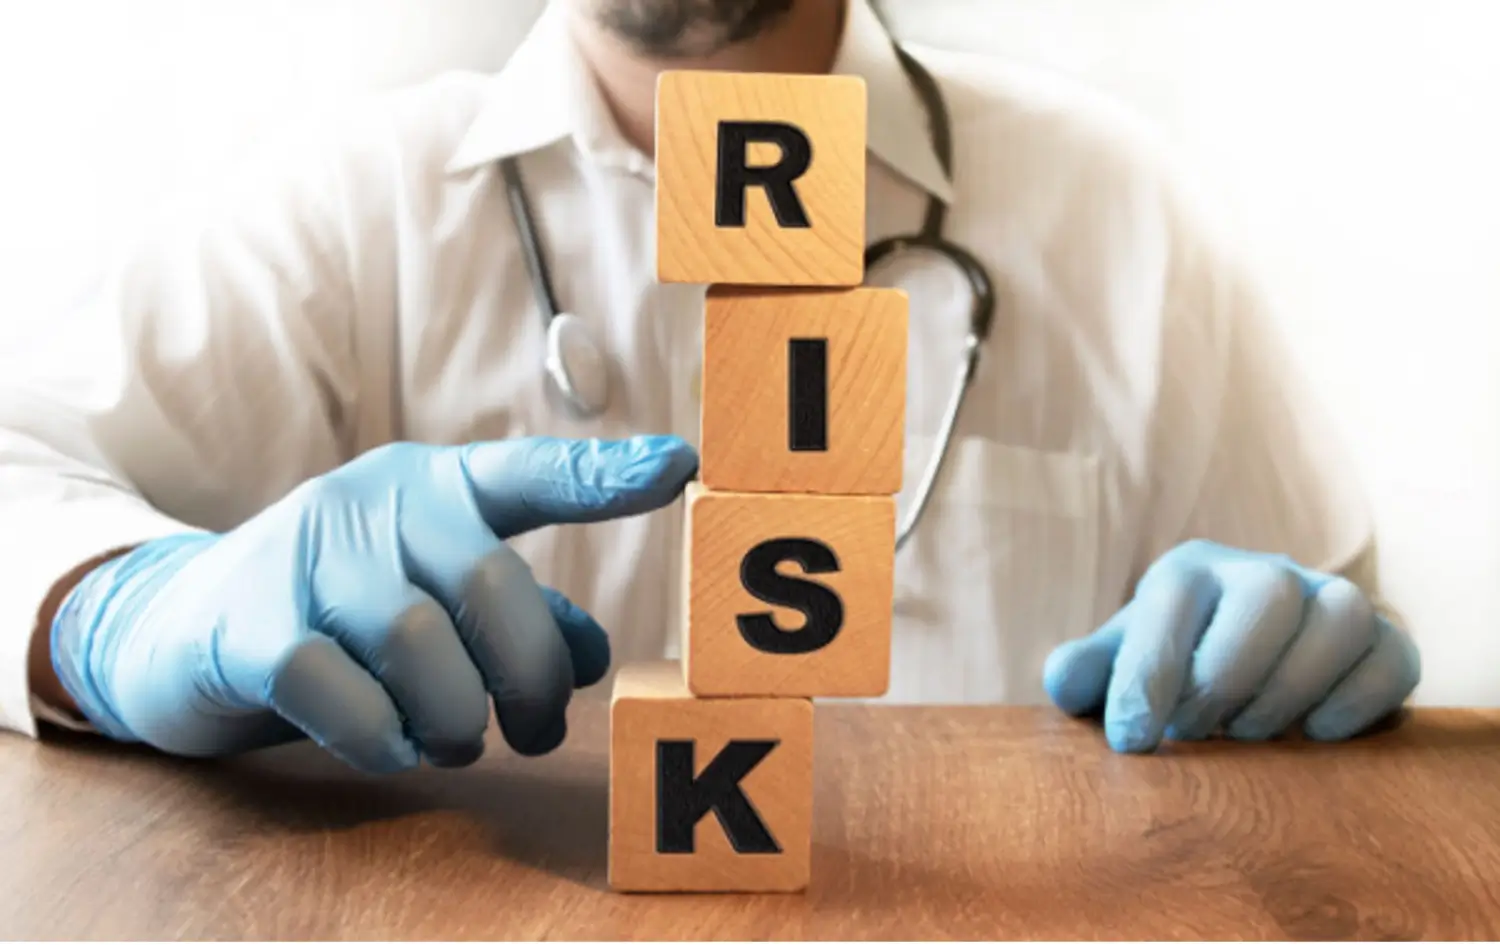 Doctor pushes over stack of blocks that spell out the word “RISK”